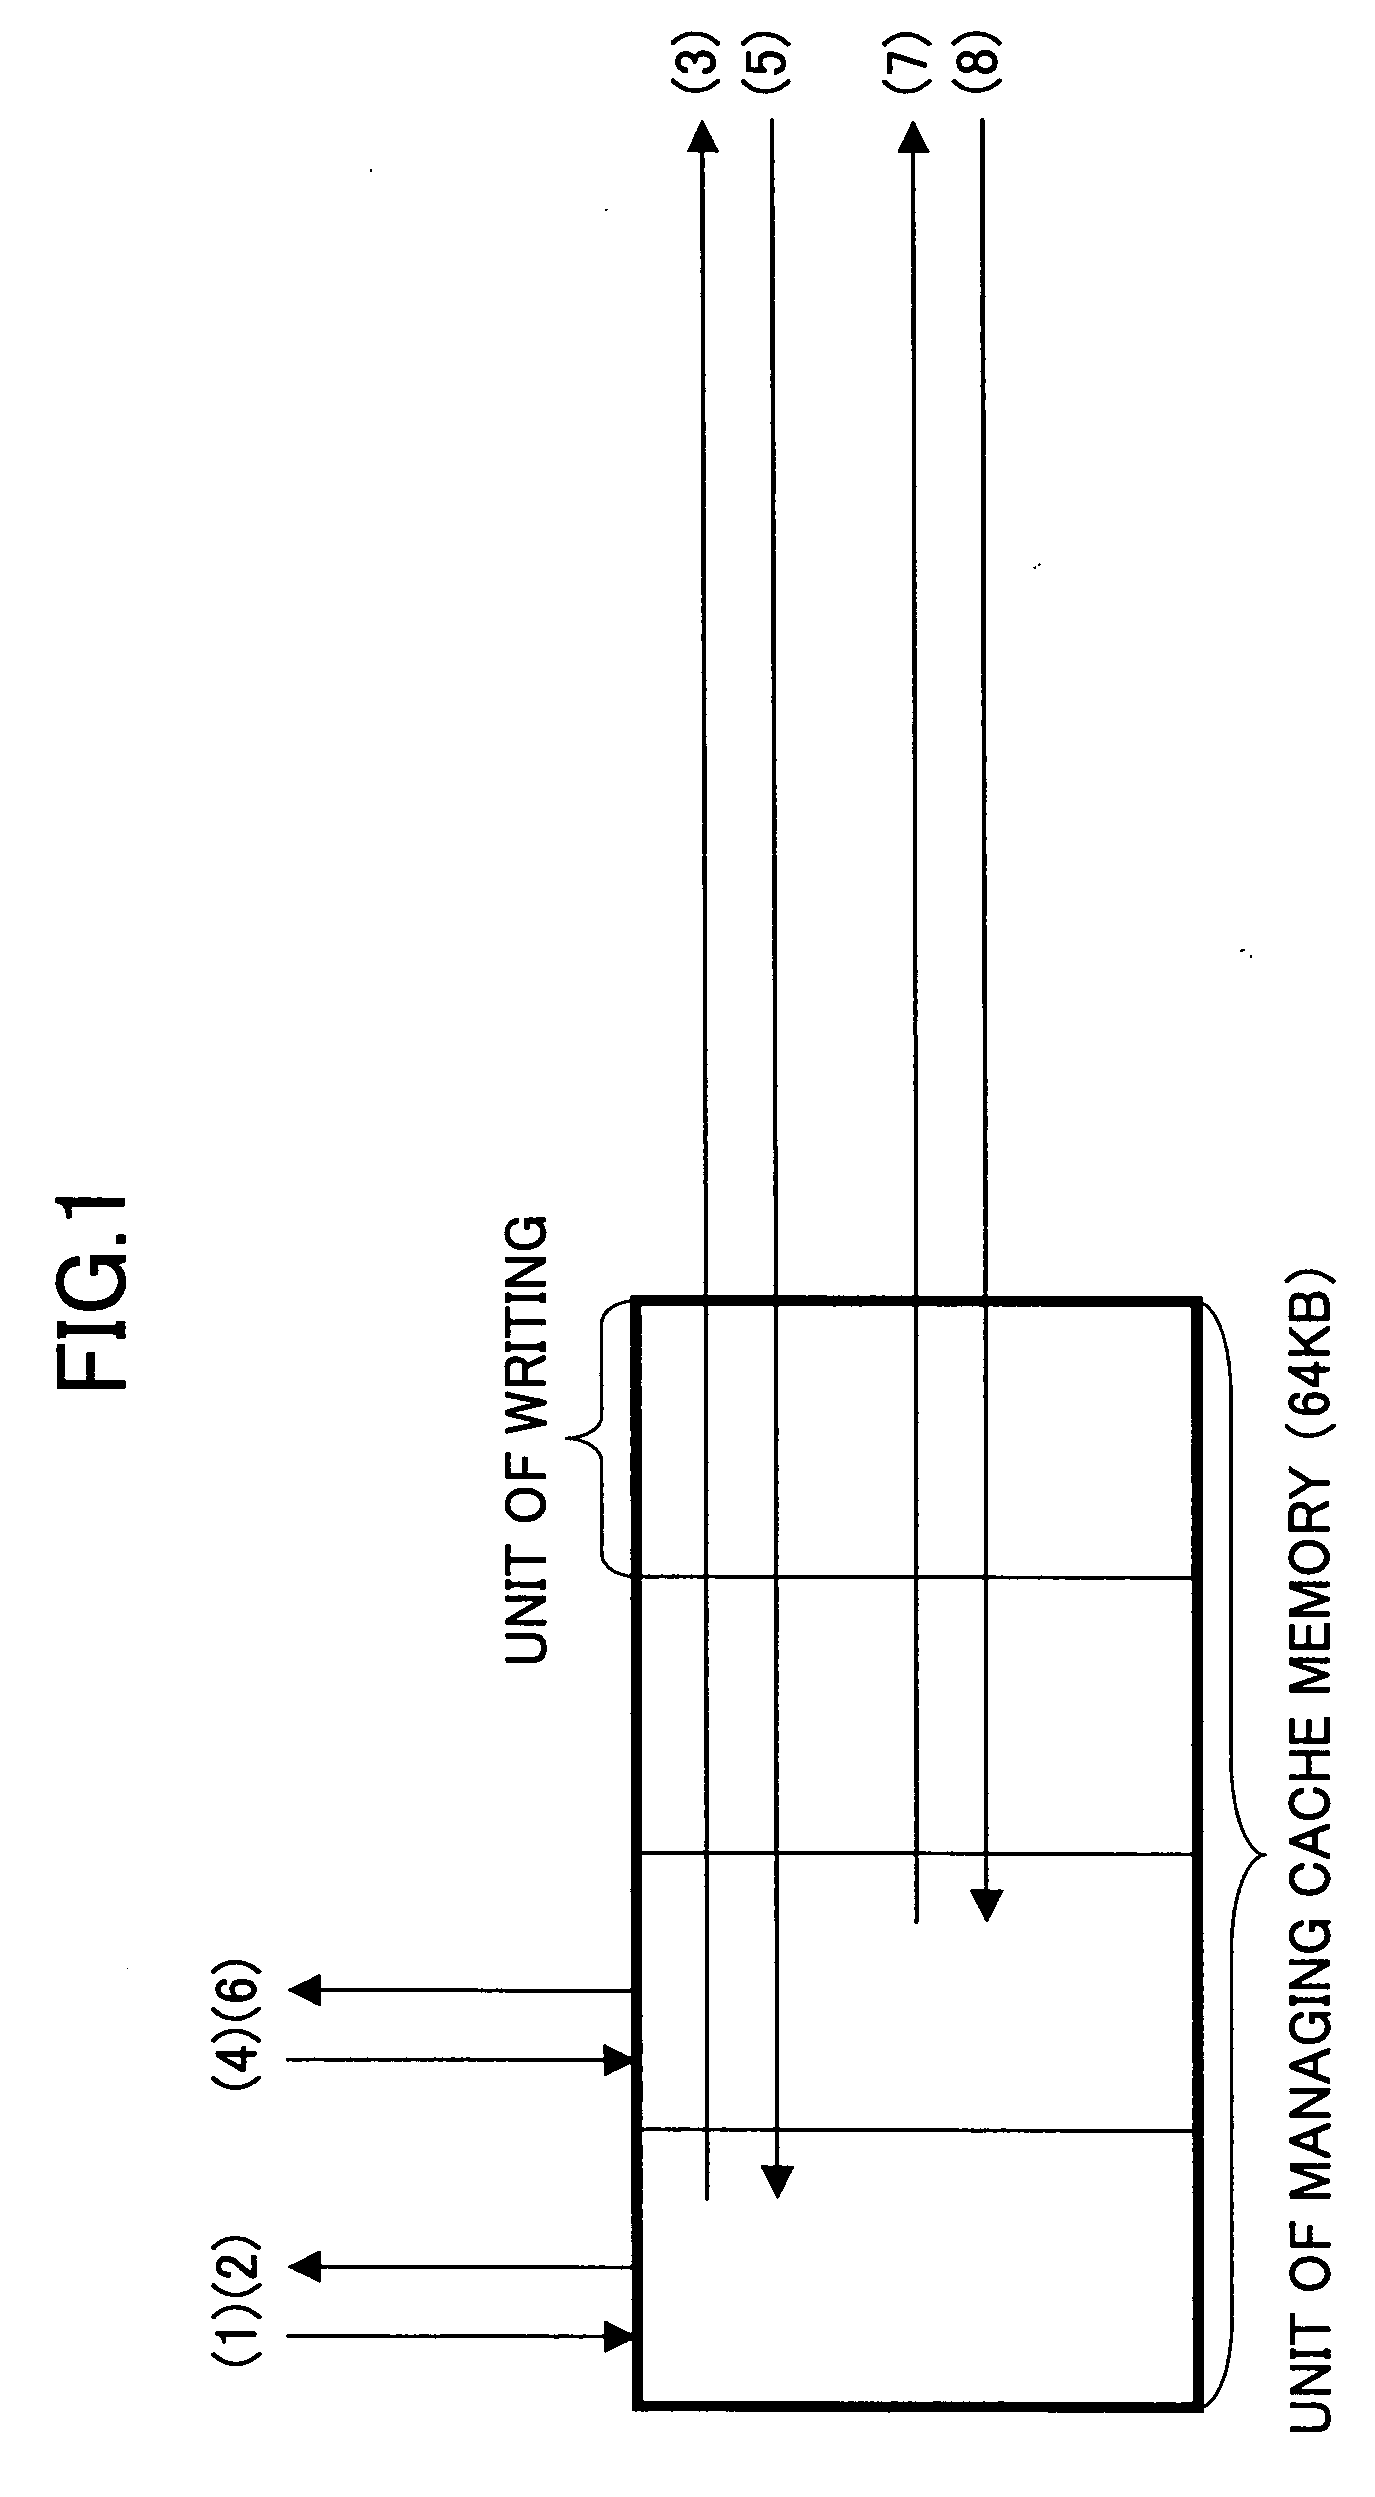 Remote copy method and storage system